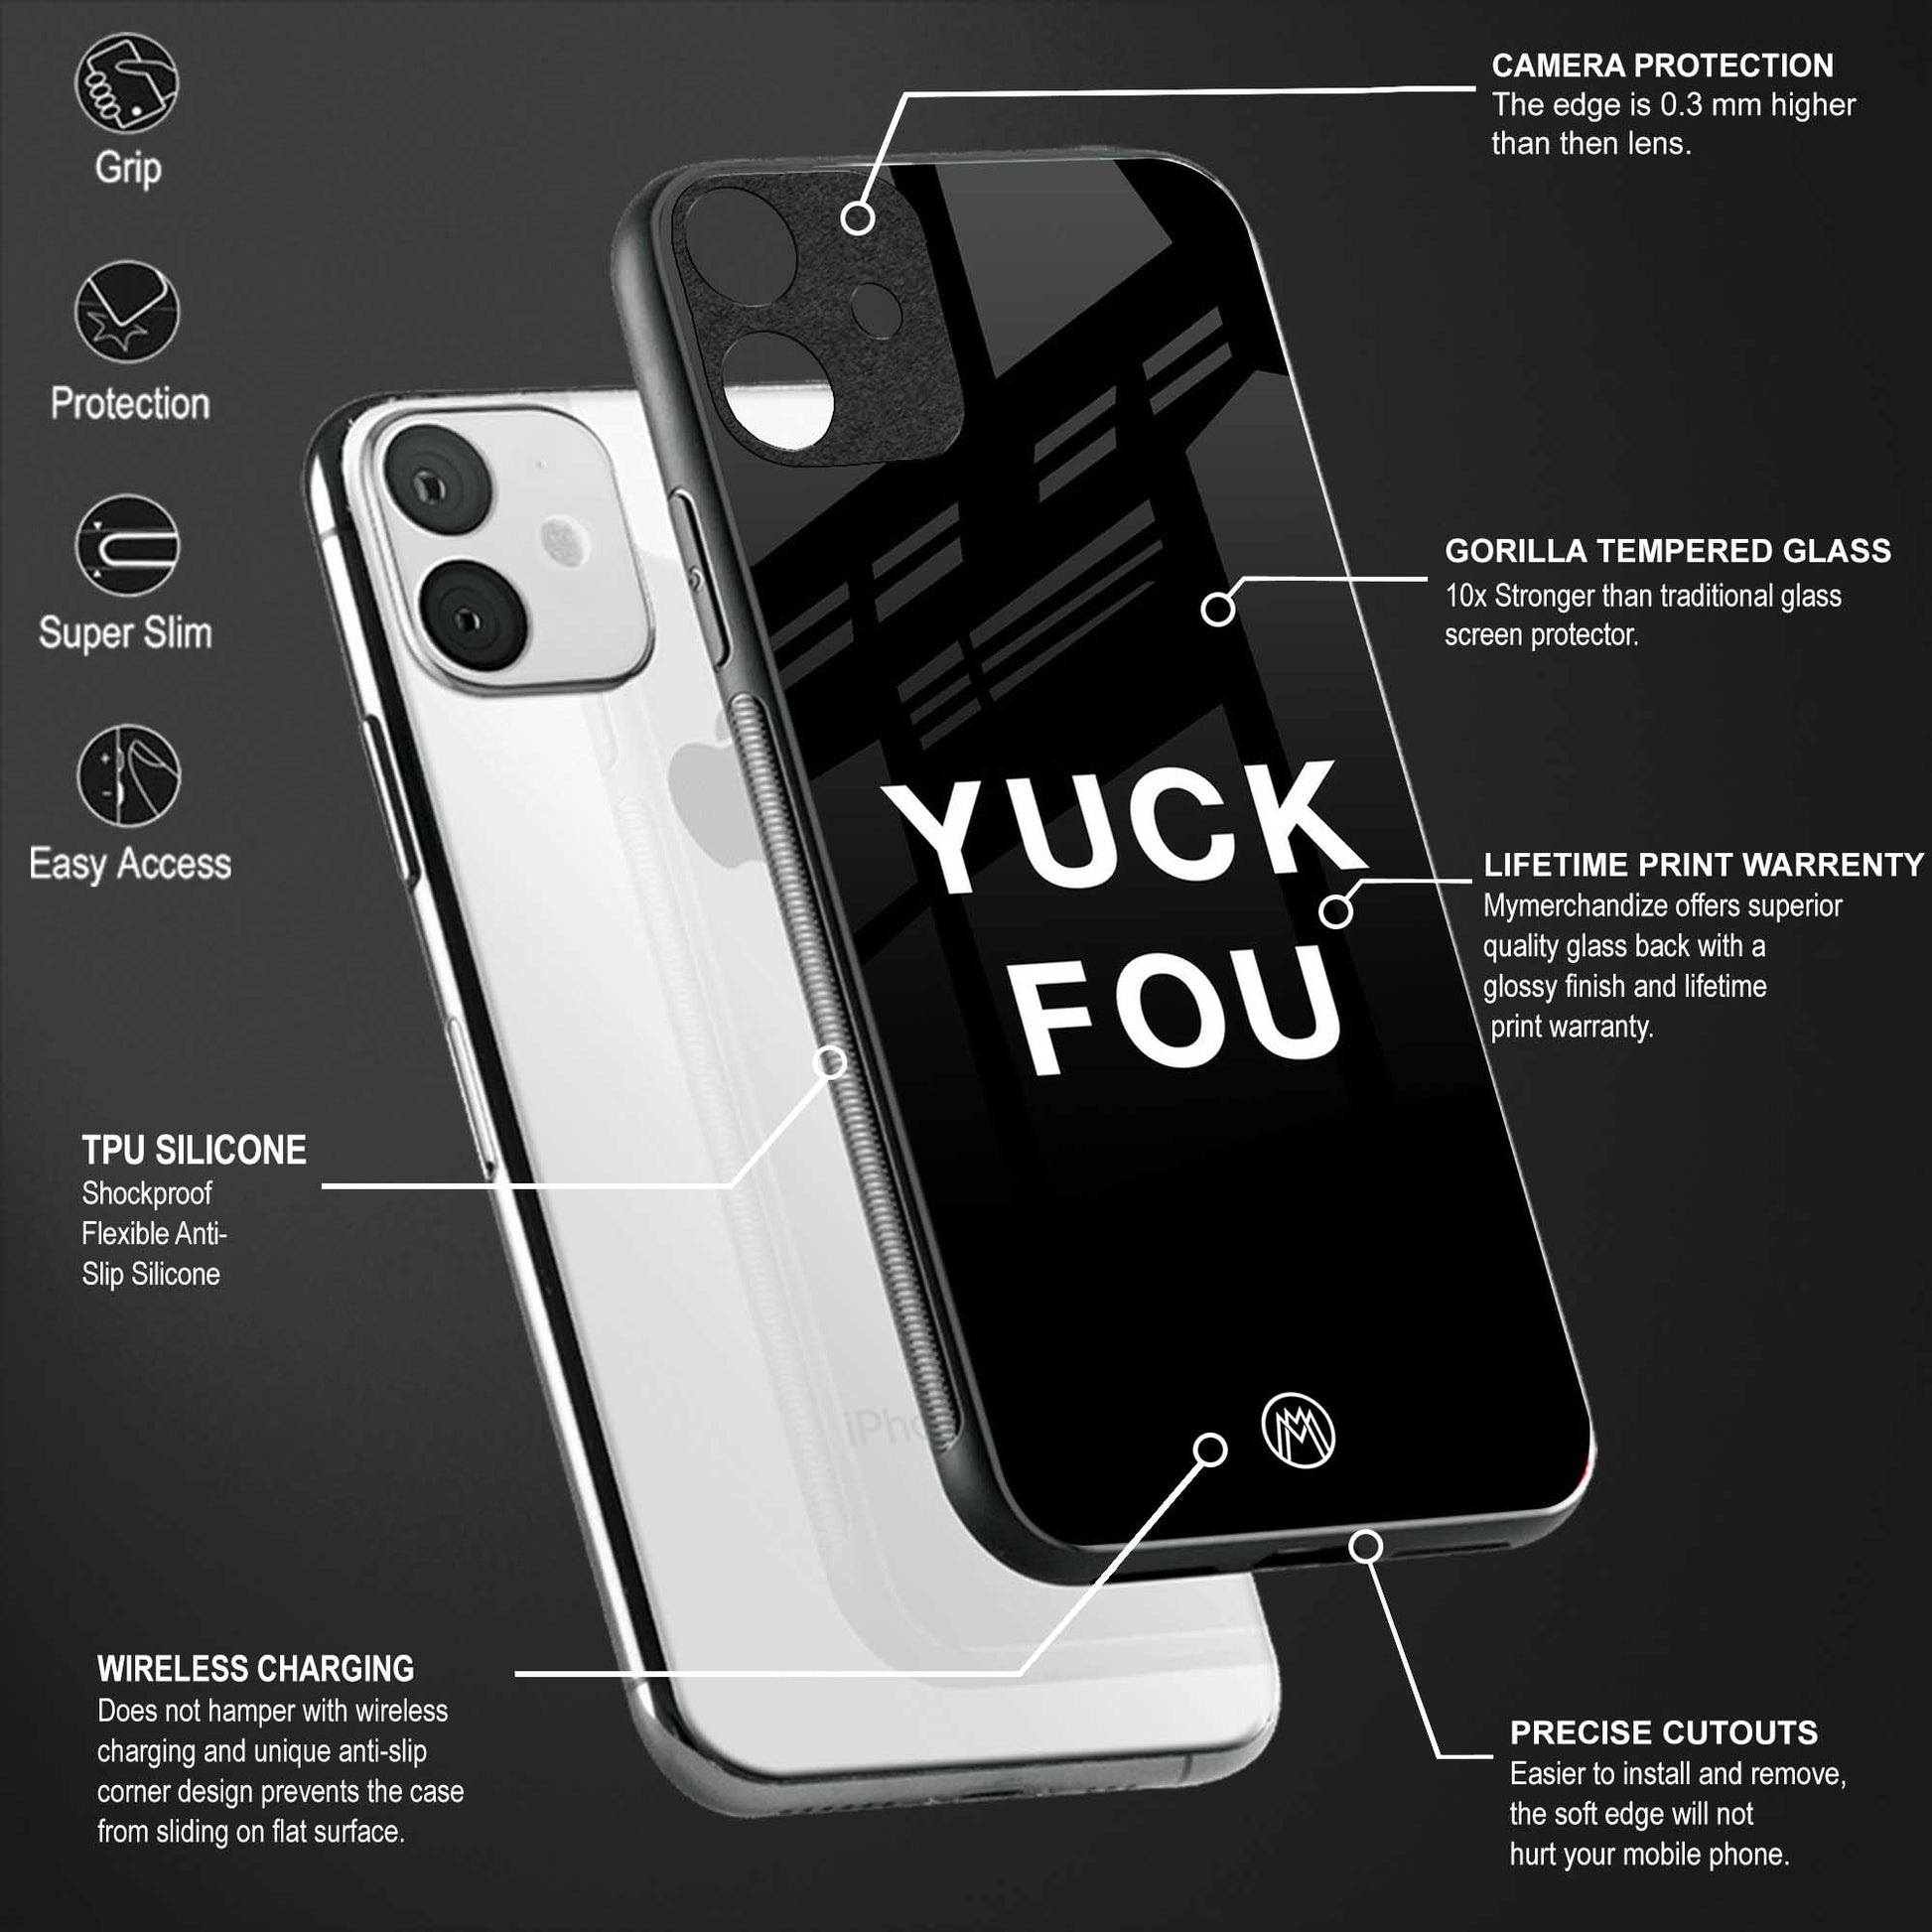 yuck fou back phone cover | glass case for redmi note 11 pro plus 4g/5g